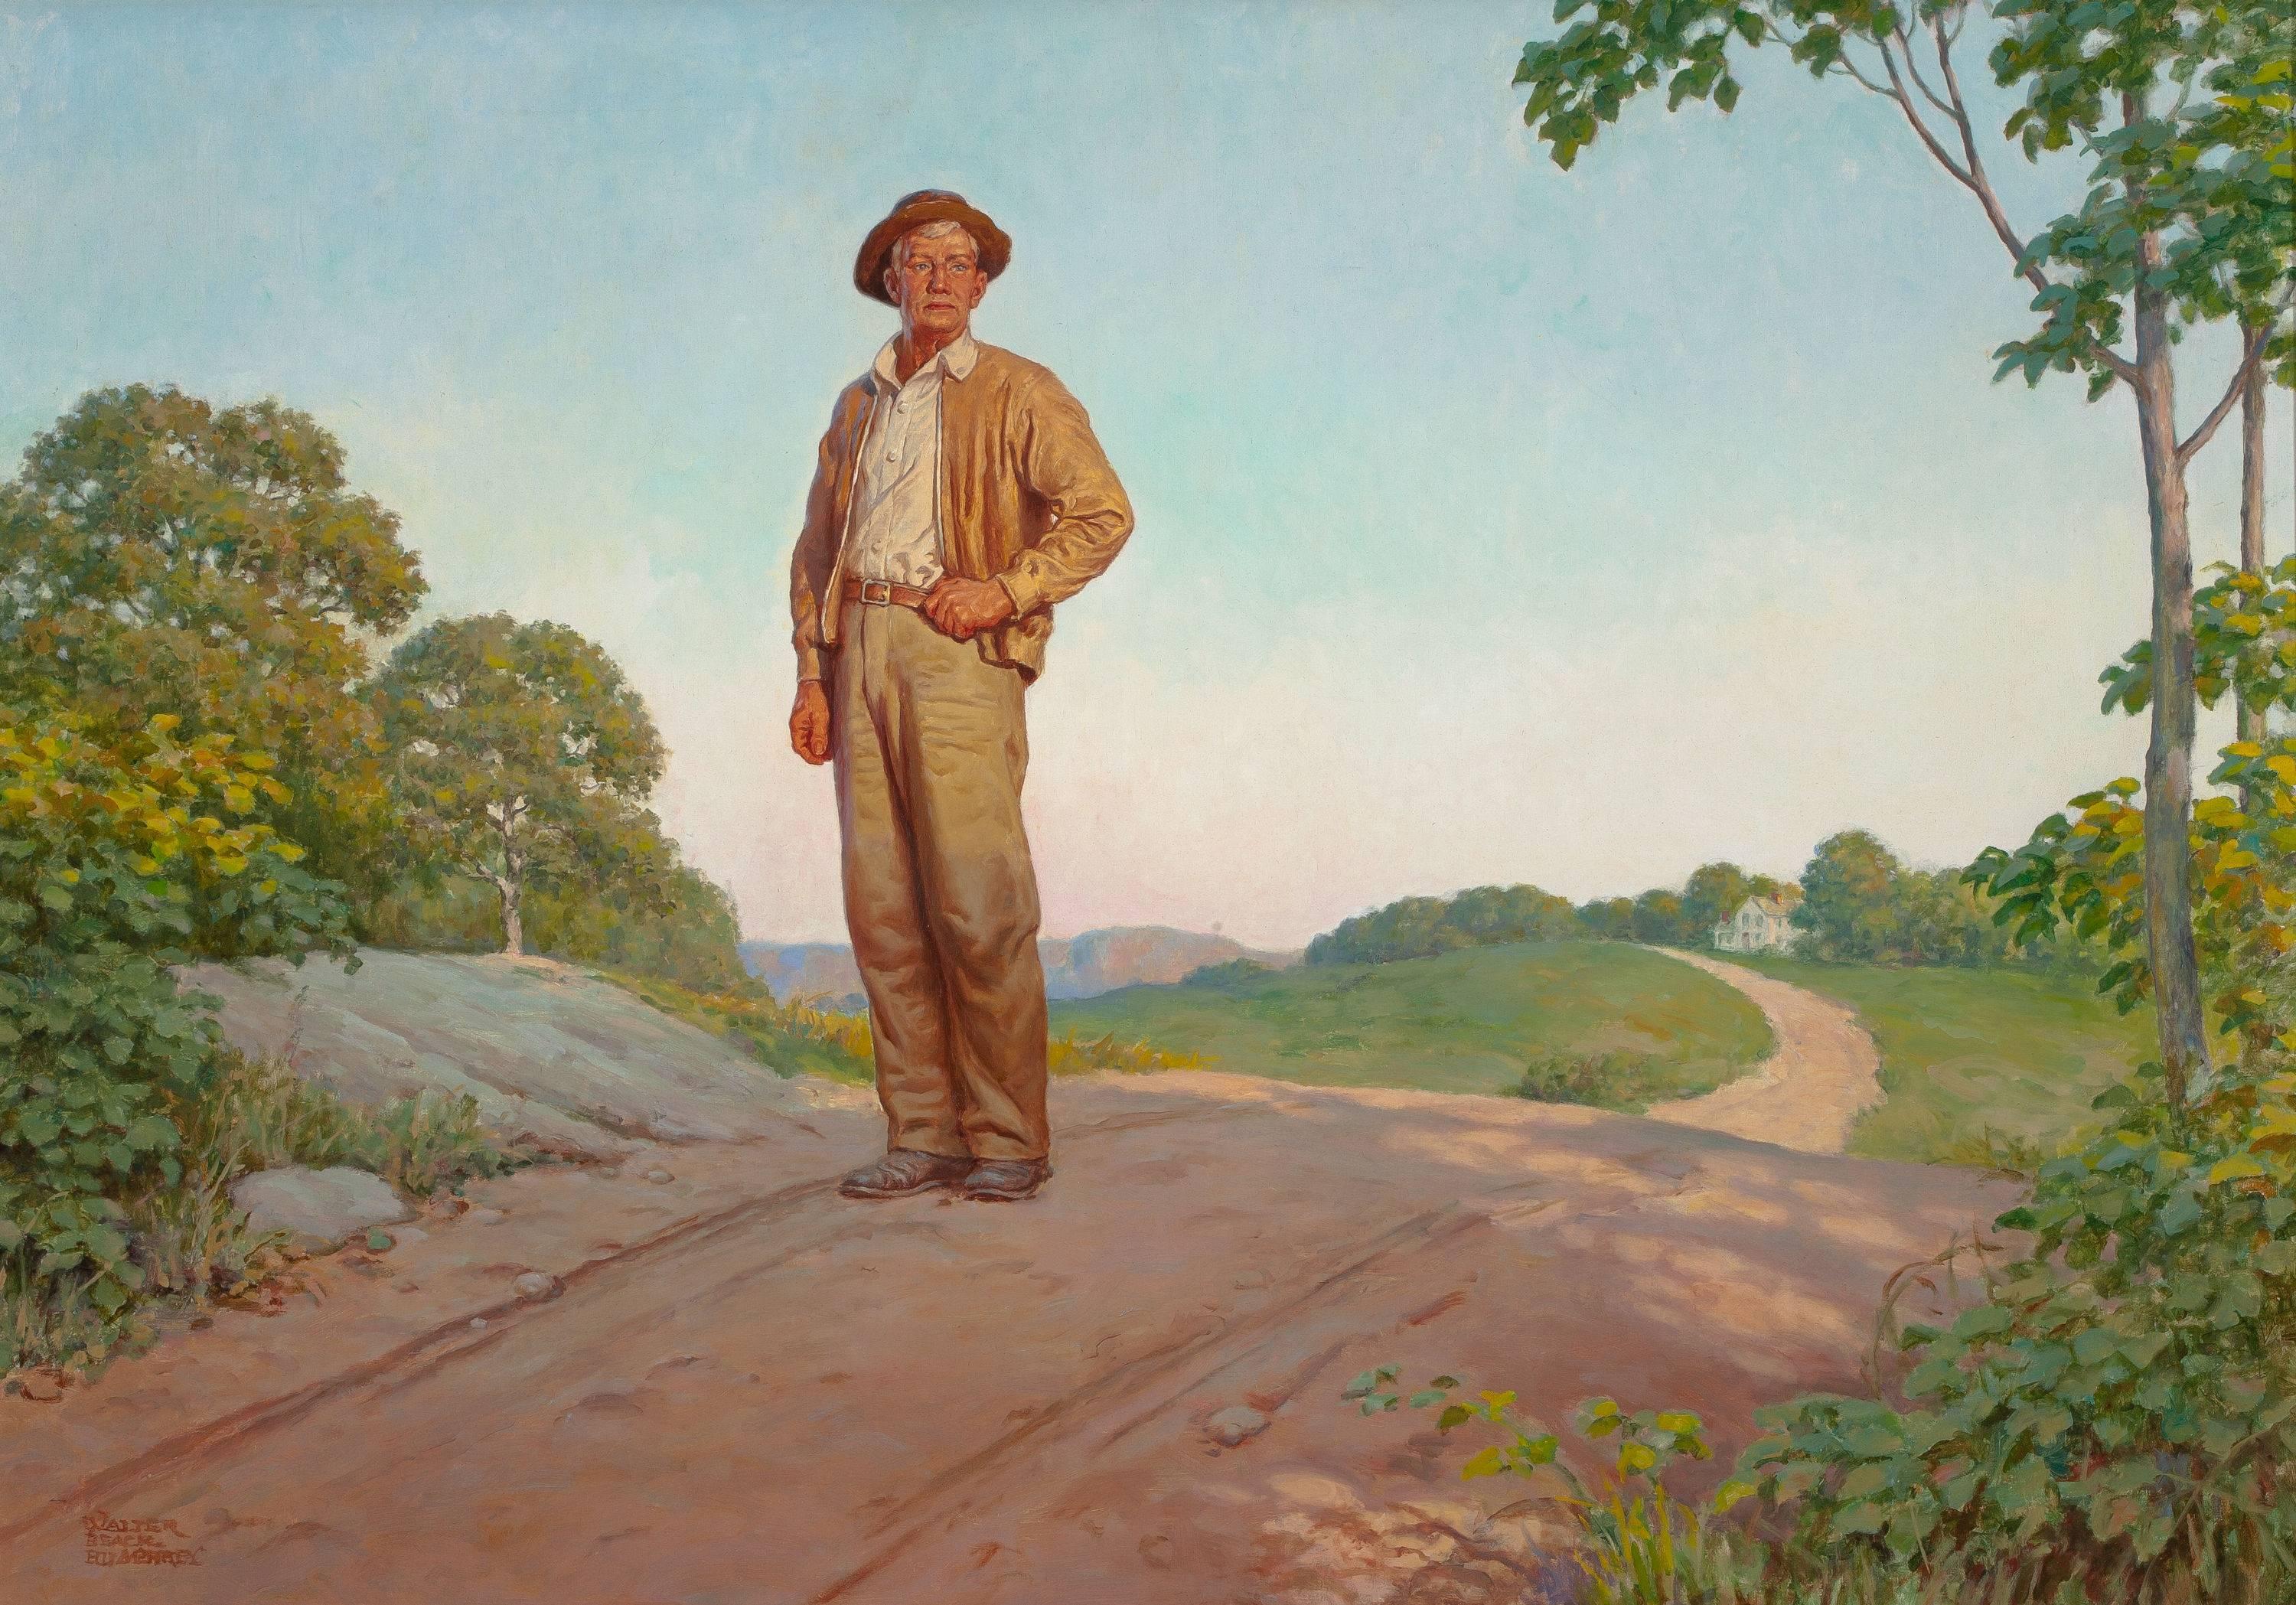 The Road to Nowhere - Painting by Walter Beach Humphrey